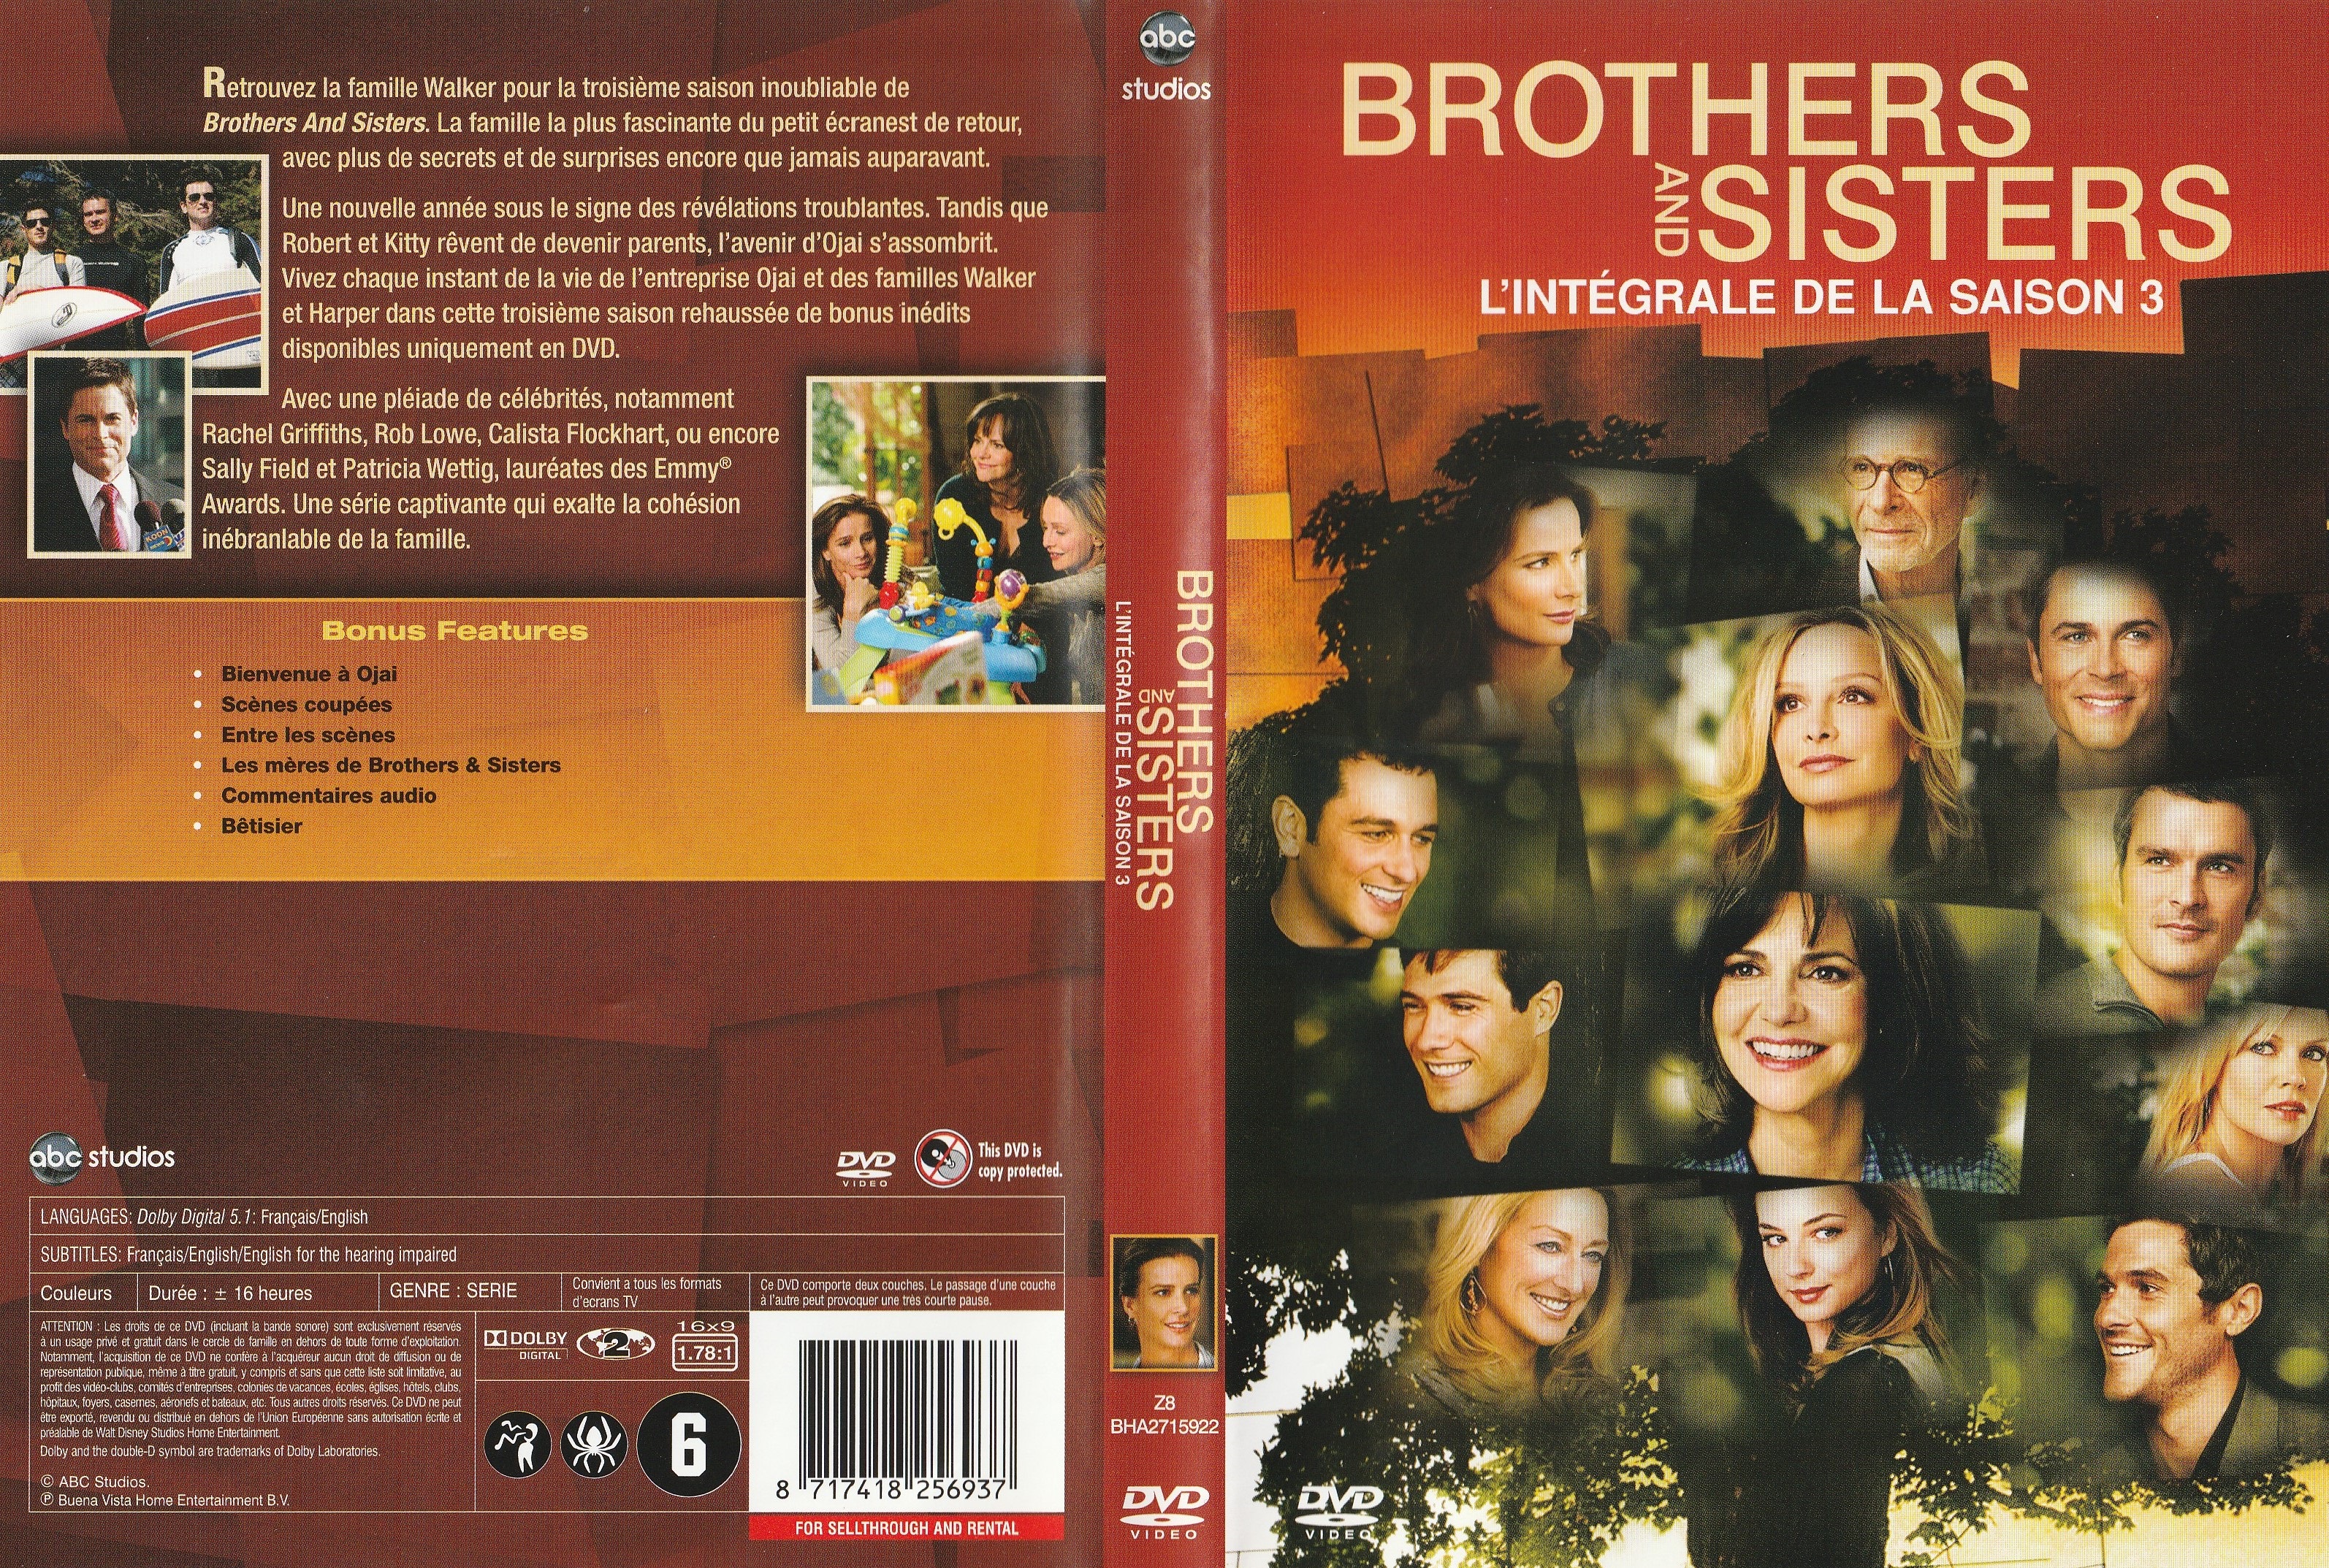 Jaquette DVD Brothers and Sisters Saison 3